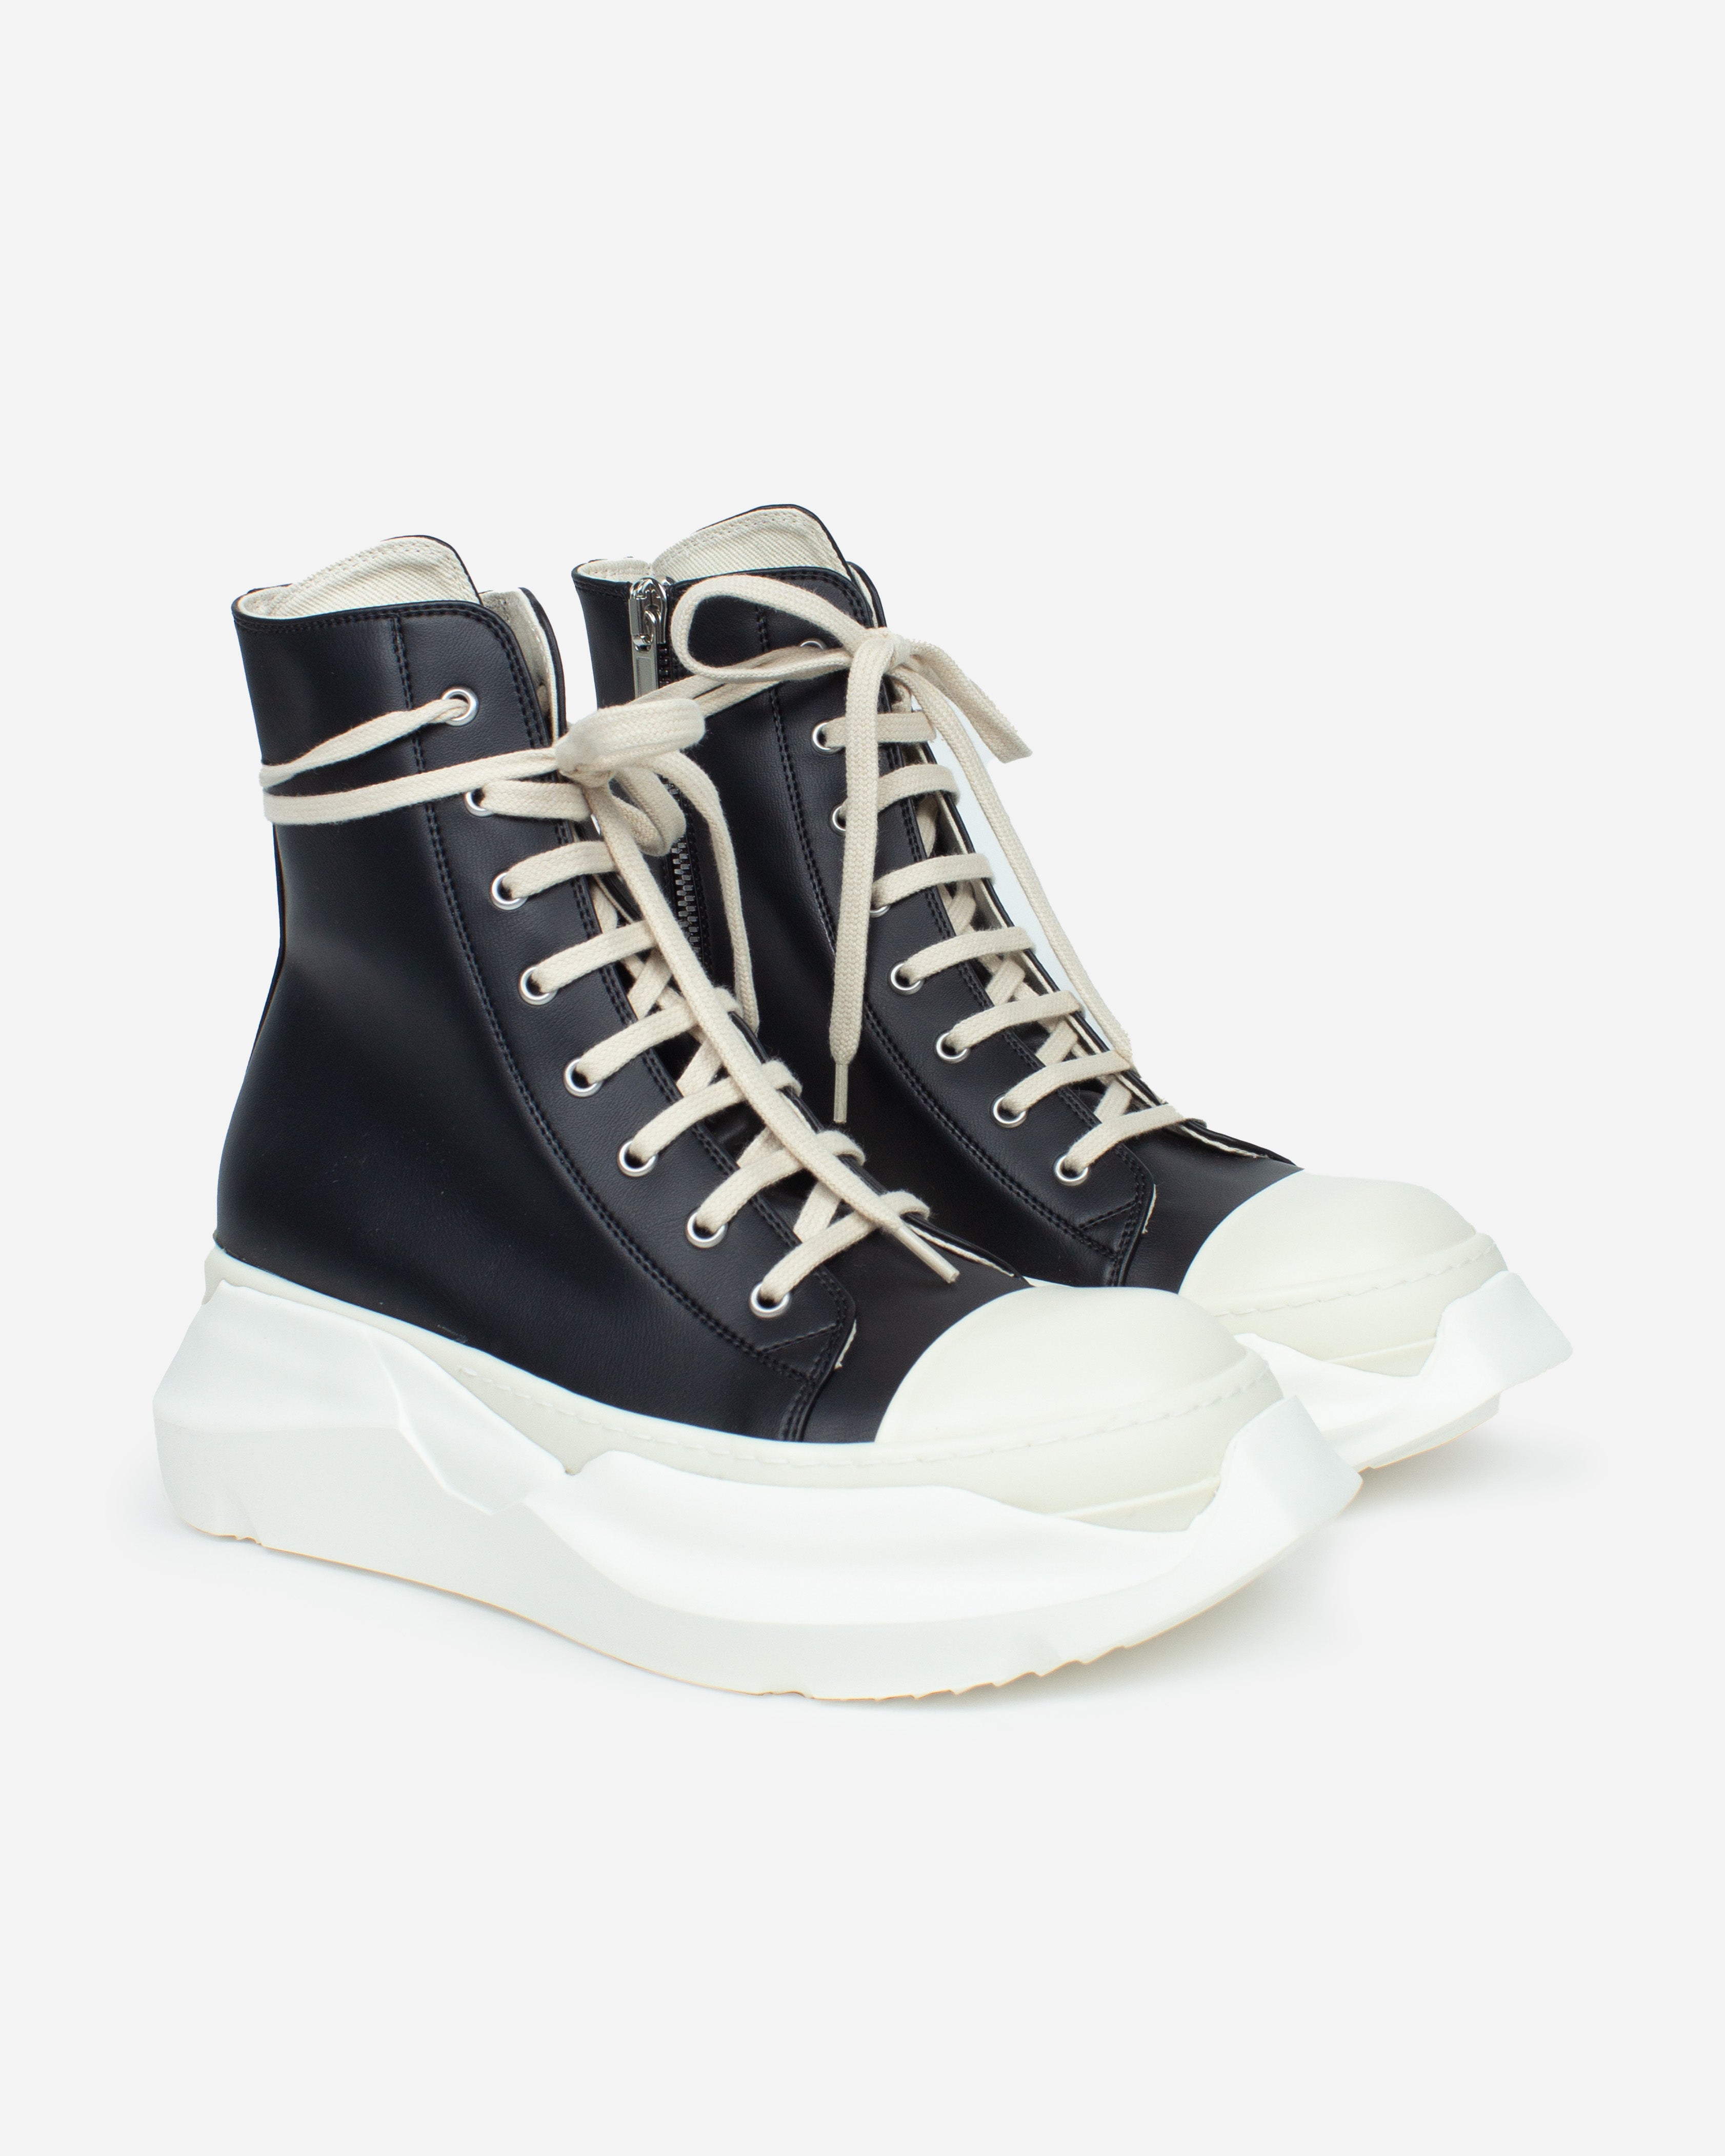 Rick Owens DRKSHDW Ramones Abstract high